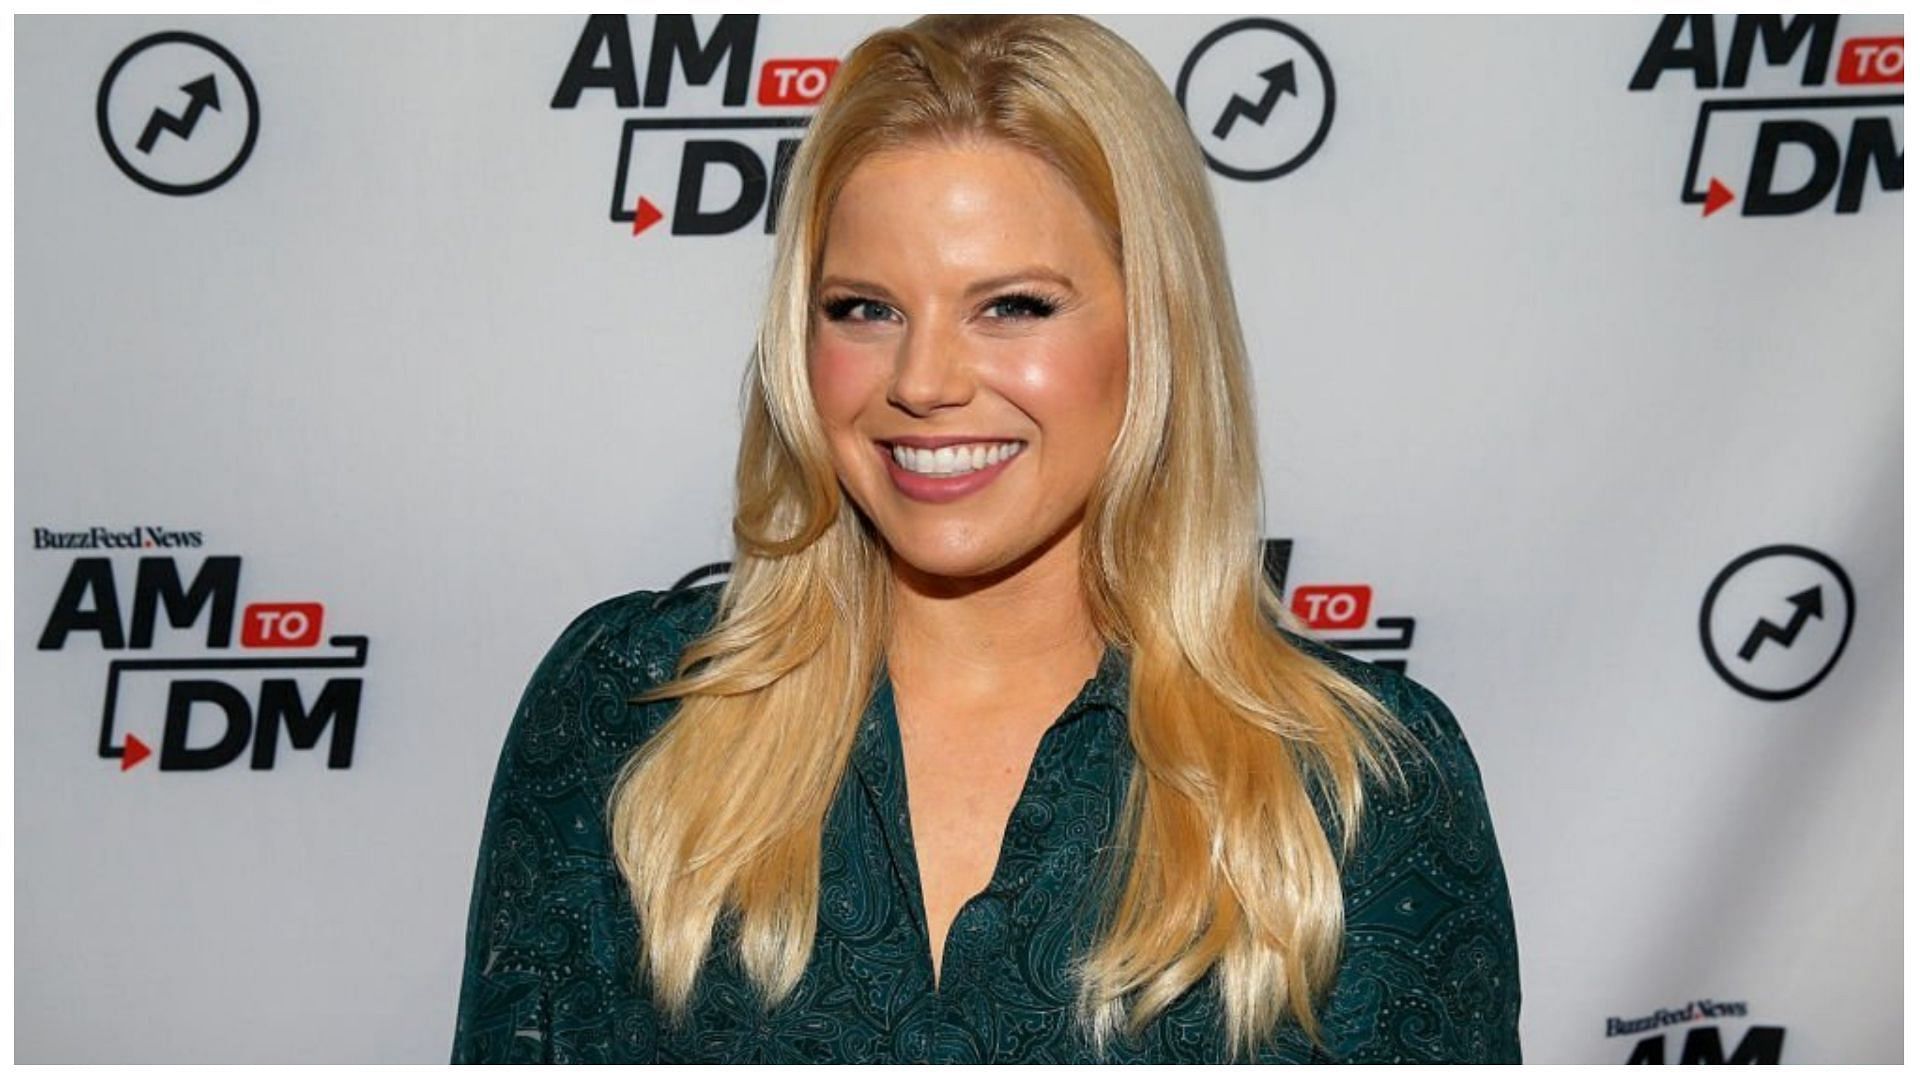 Megan Hilty is a famous actress and singer (Image via Dominik Bindl/Getty Images)